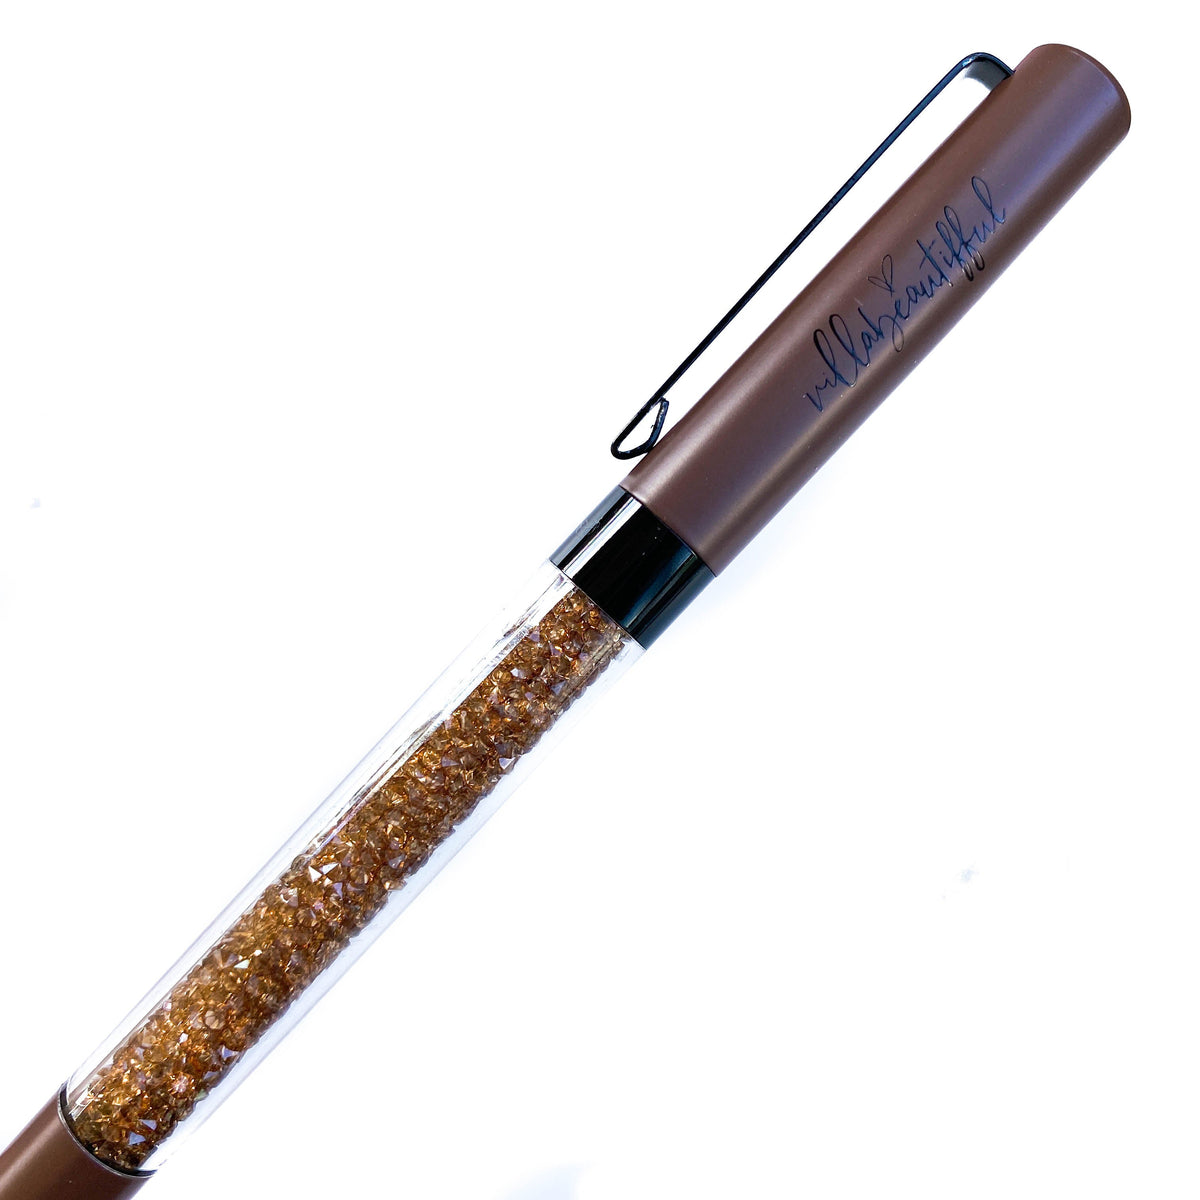 Coco Imperfect Crystal VBPen | limited pen